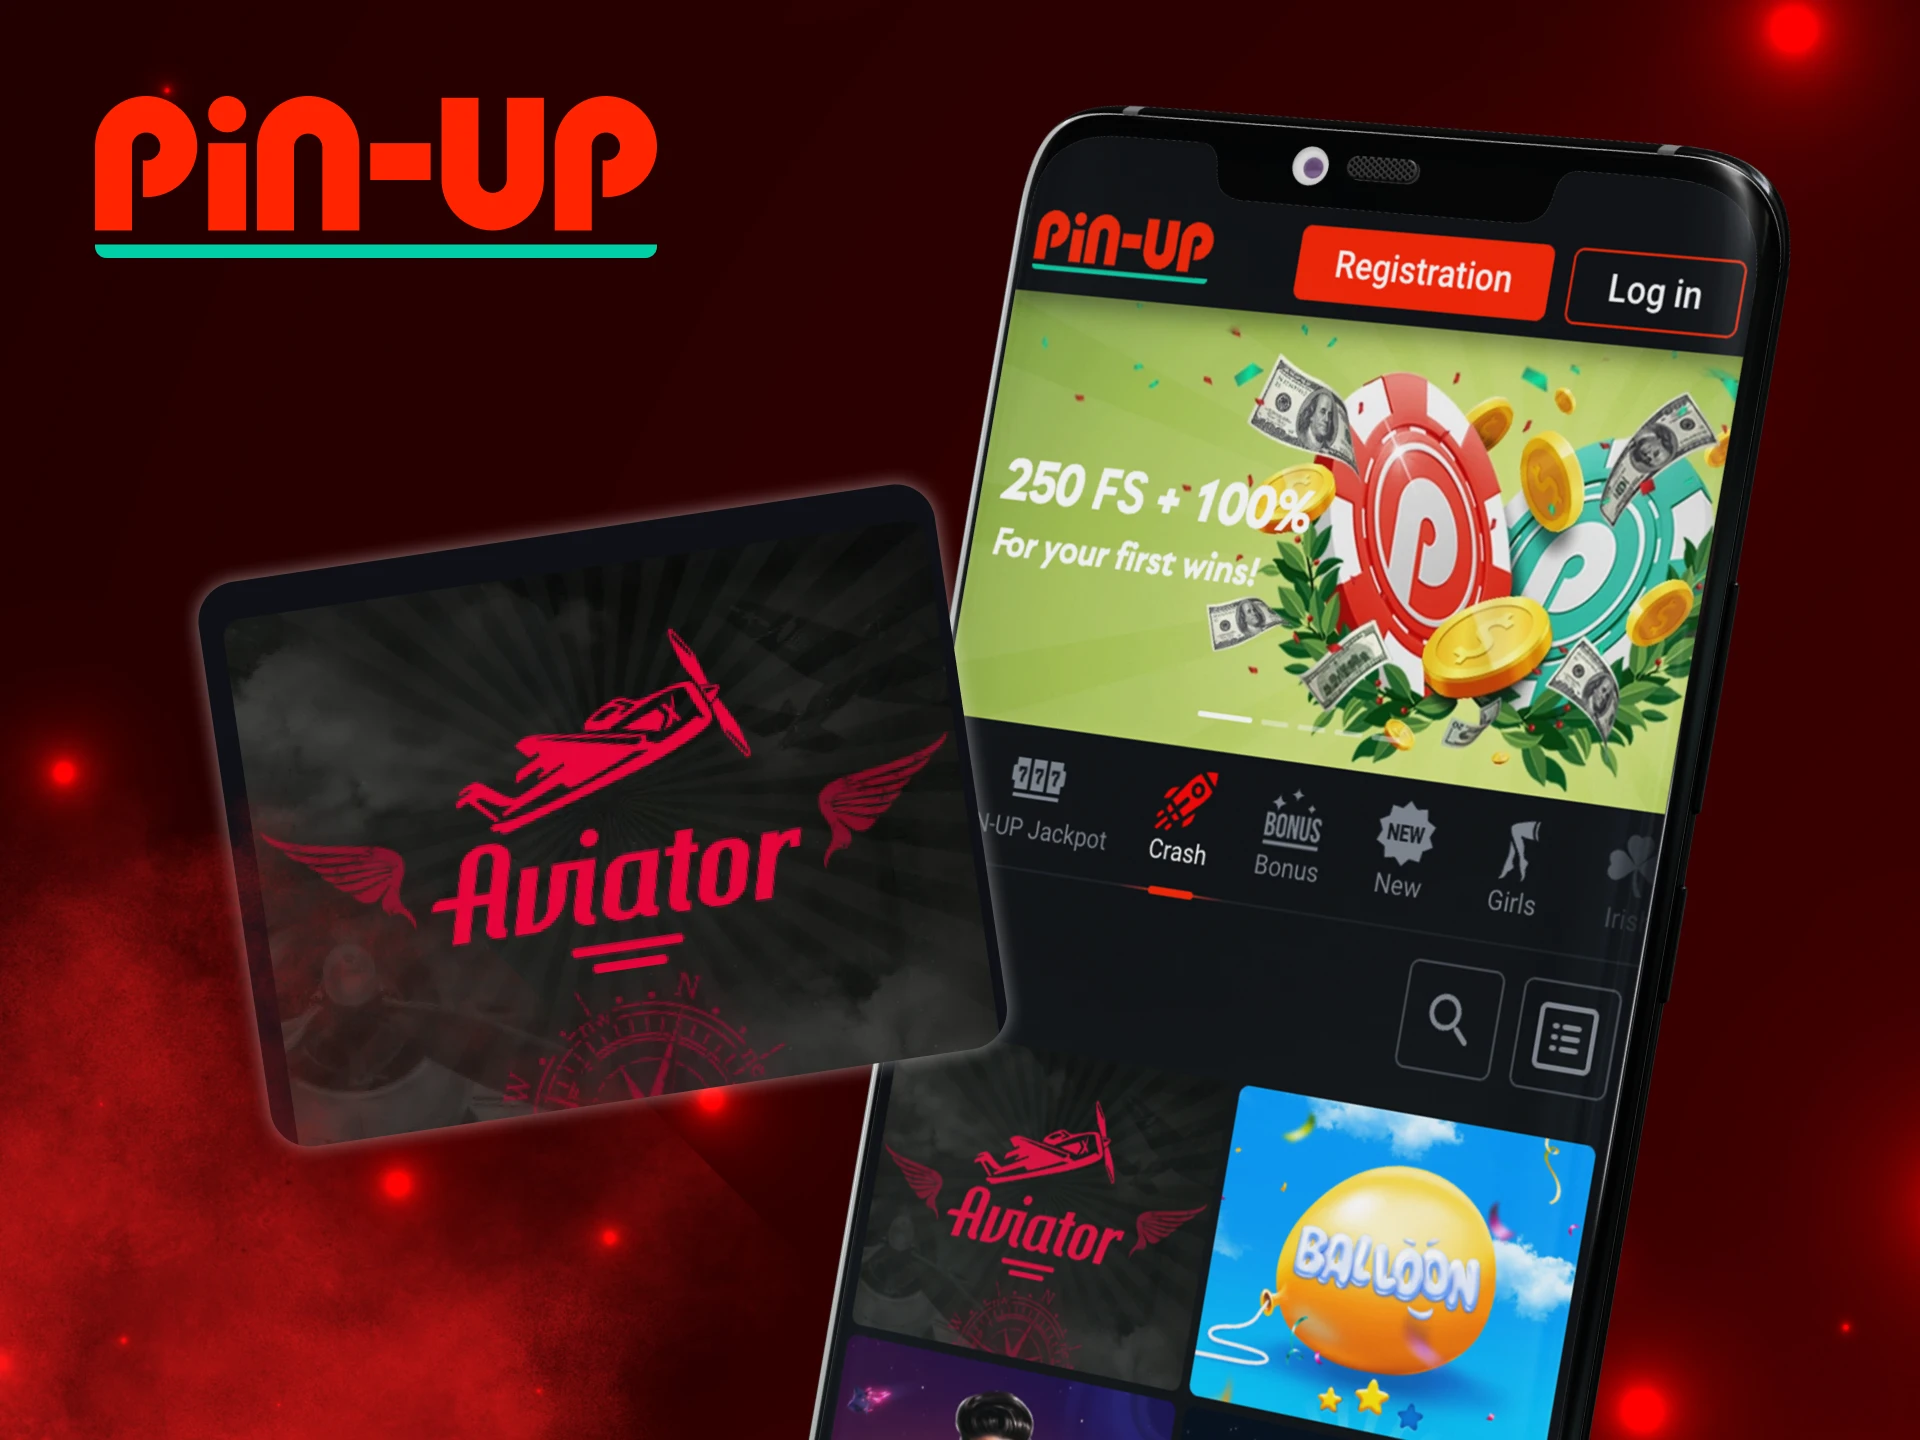 Users can play the game seamlessly directly from their iOS or Android smartphones at Pin Up Casino.